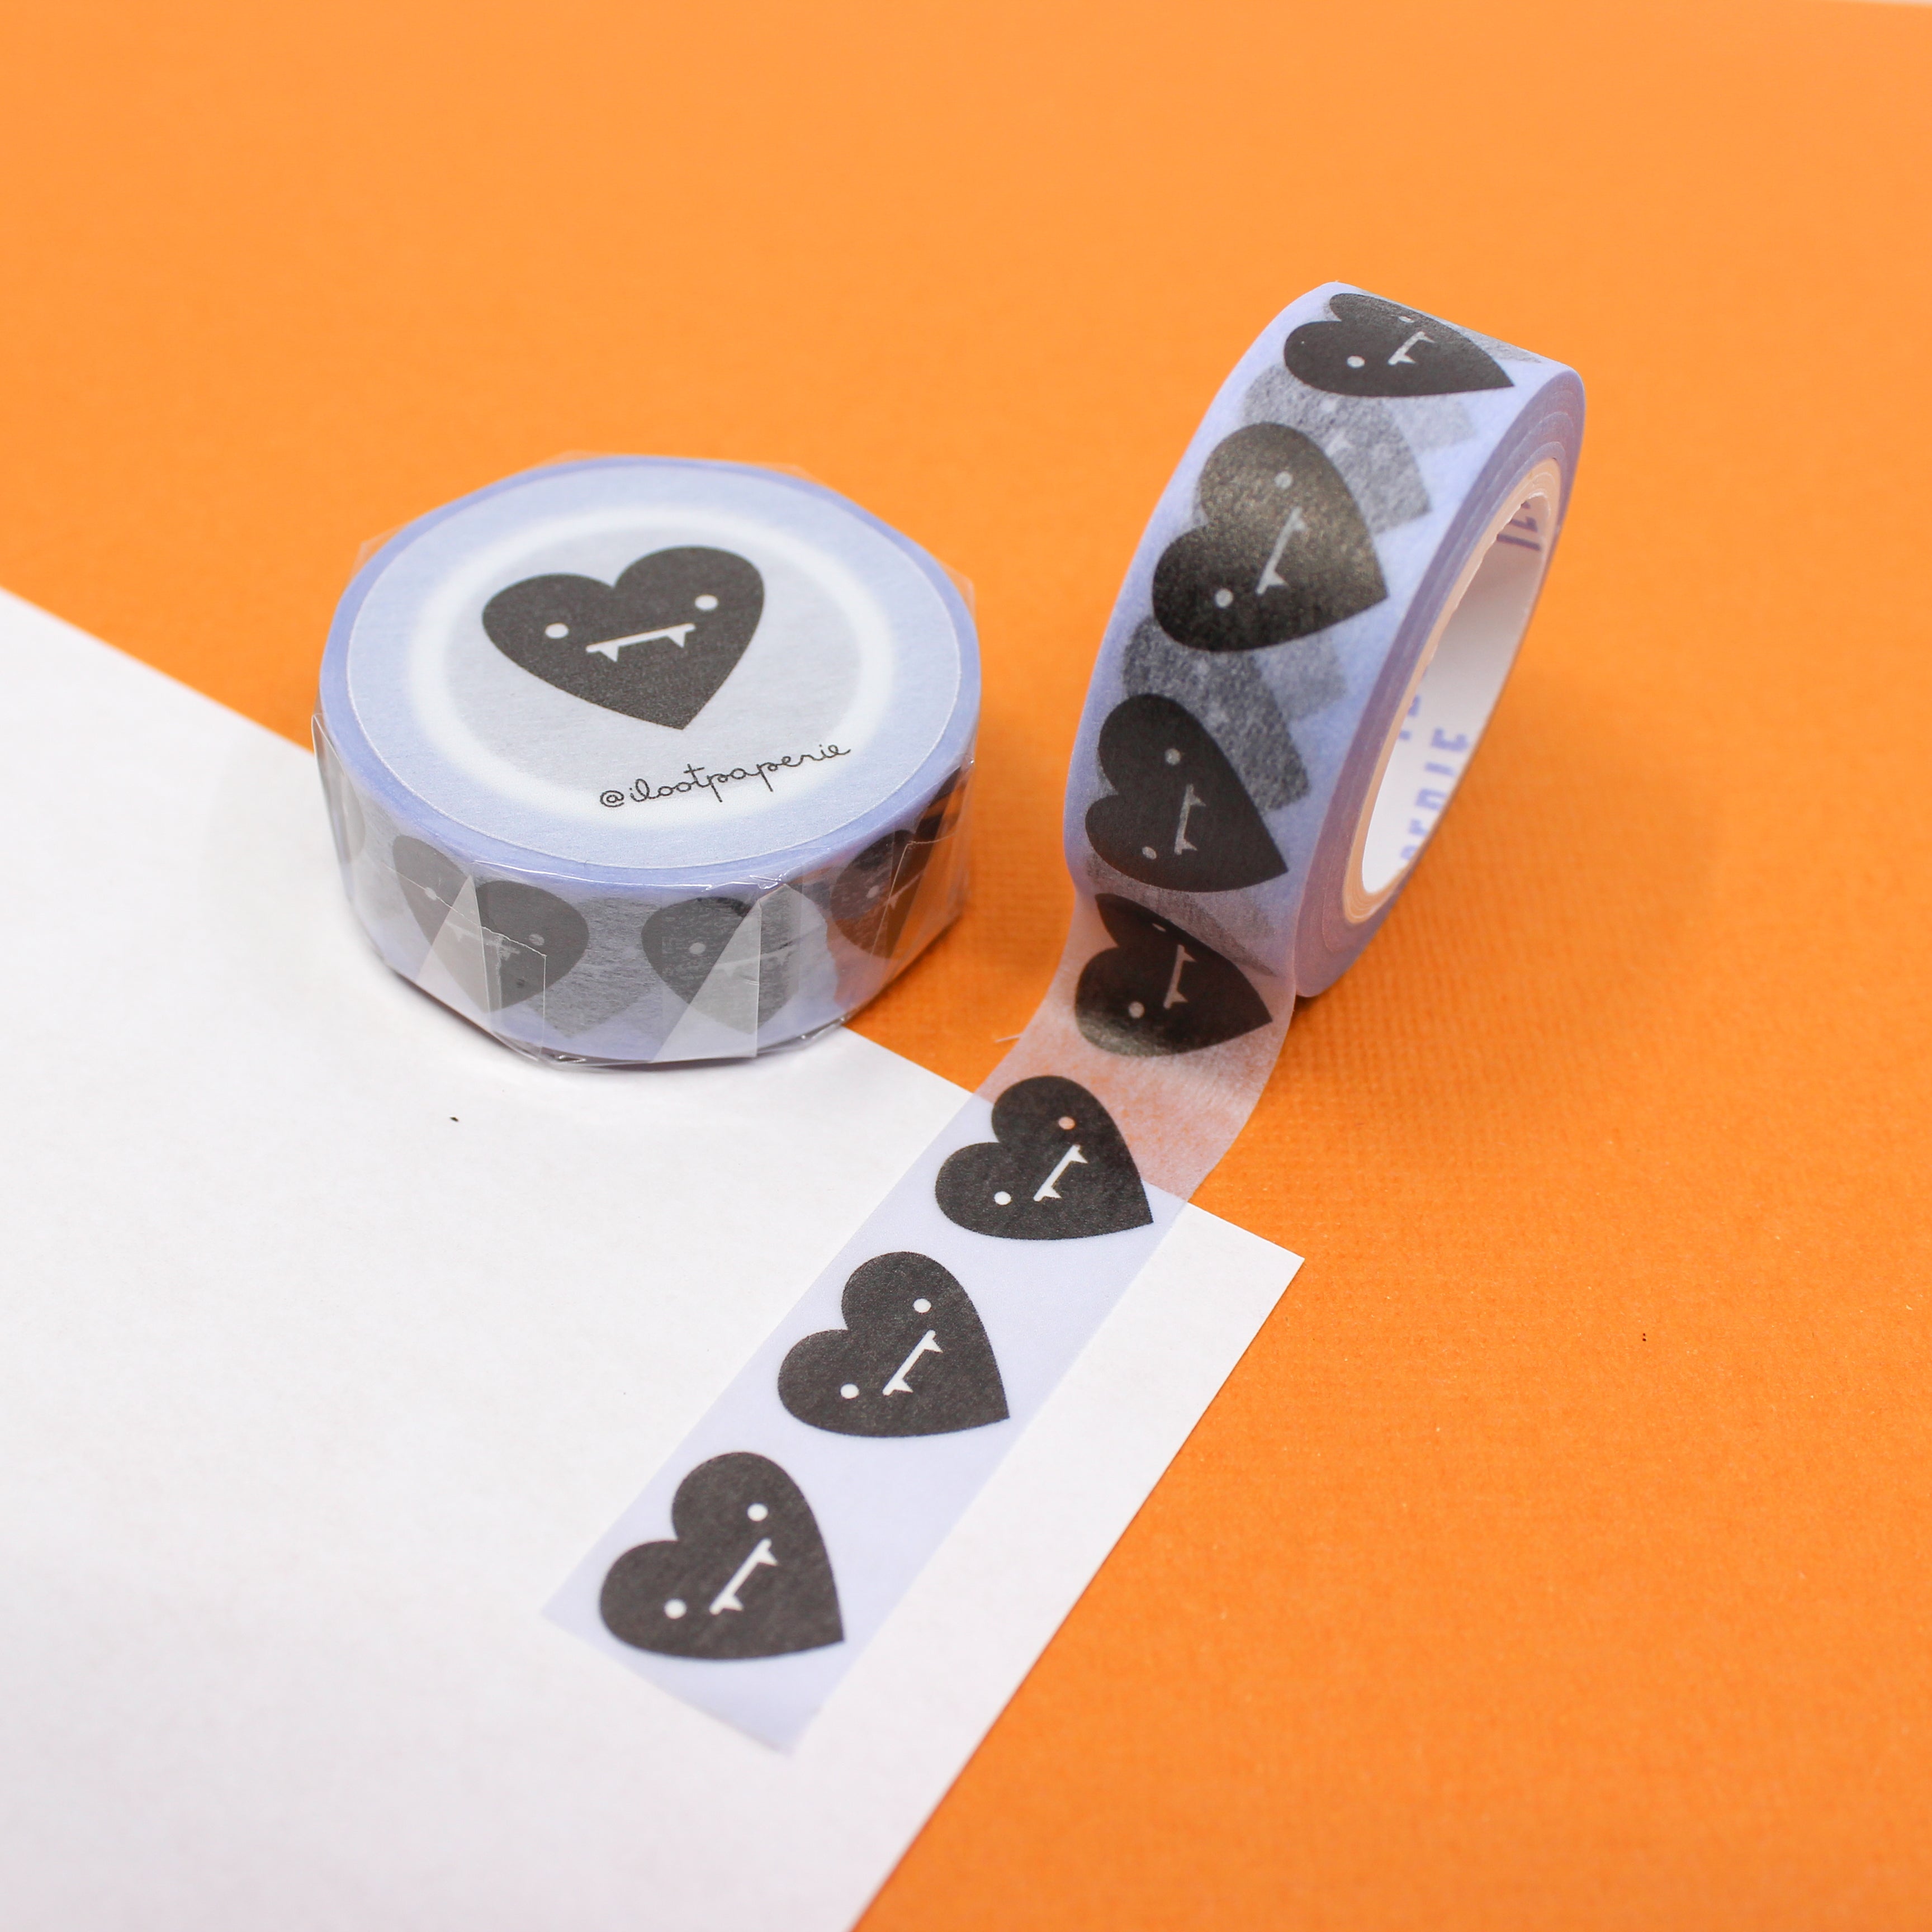 This is a spooky black heart themed washi tape from BBB Supplies Craft Shop